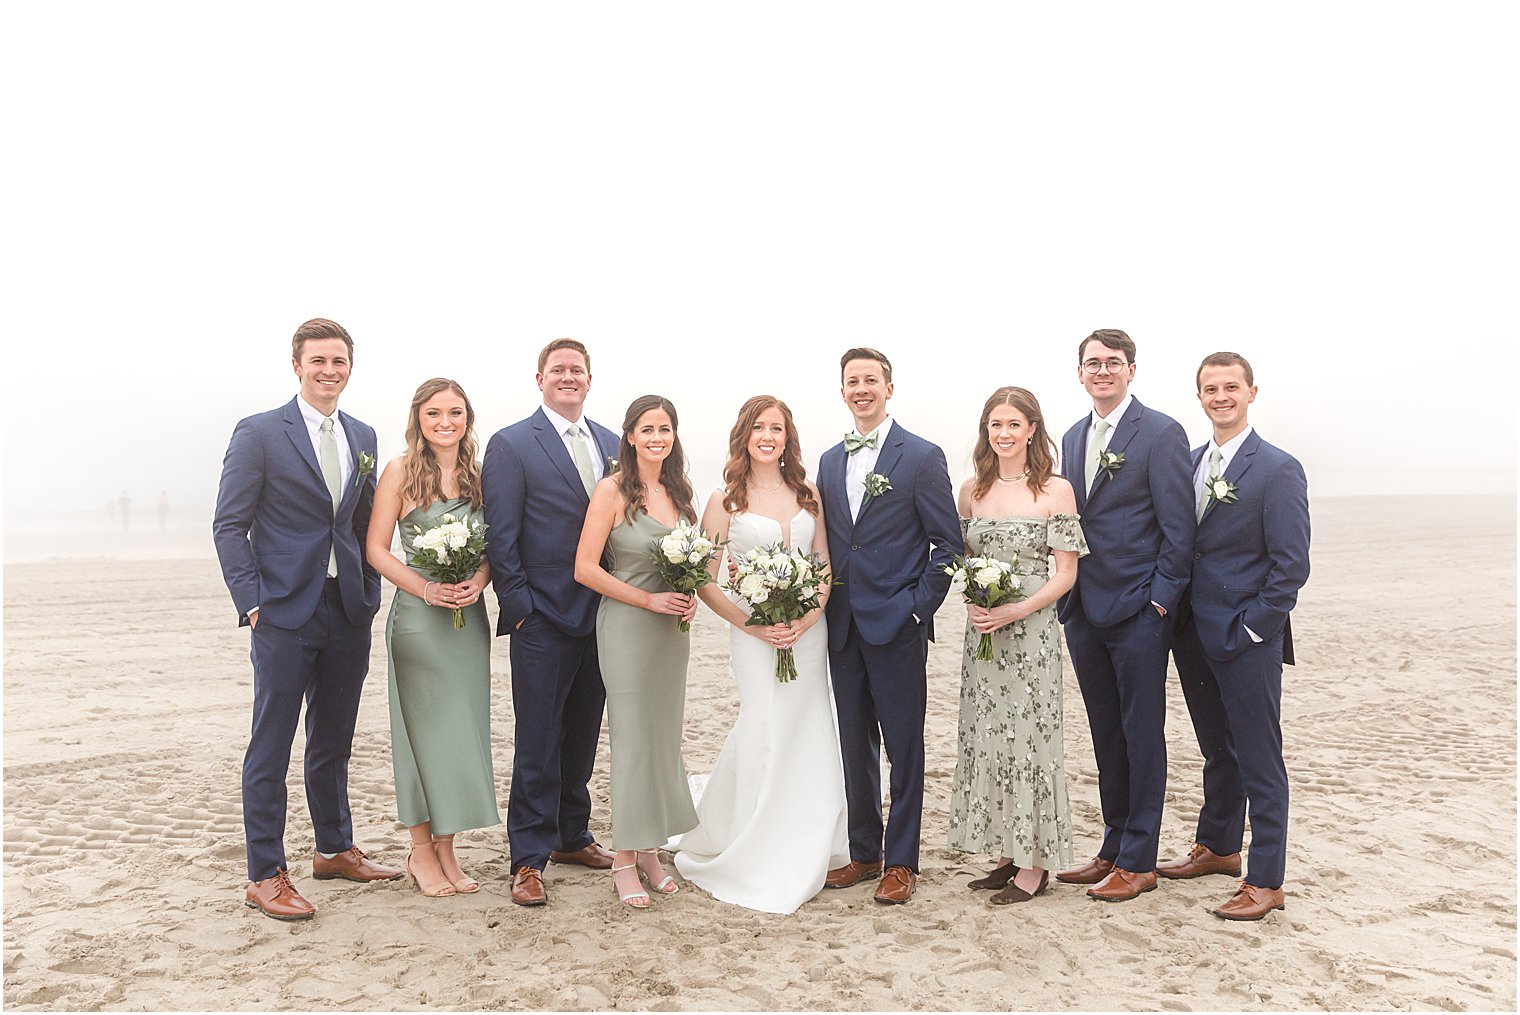 newlyweds stand on beach with bridal party